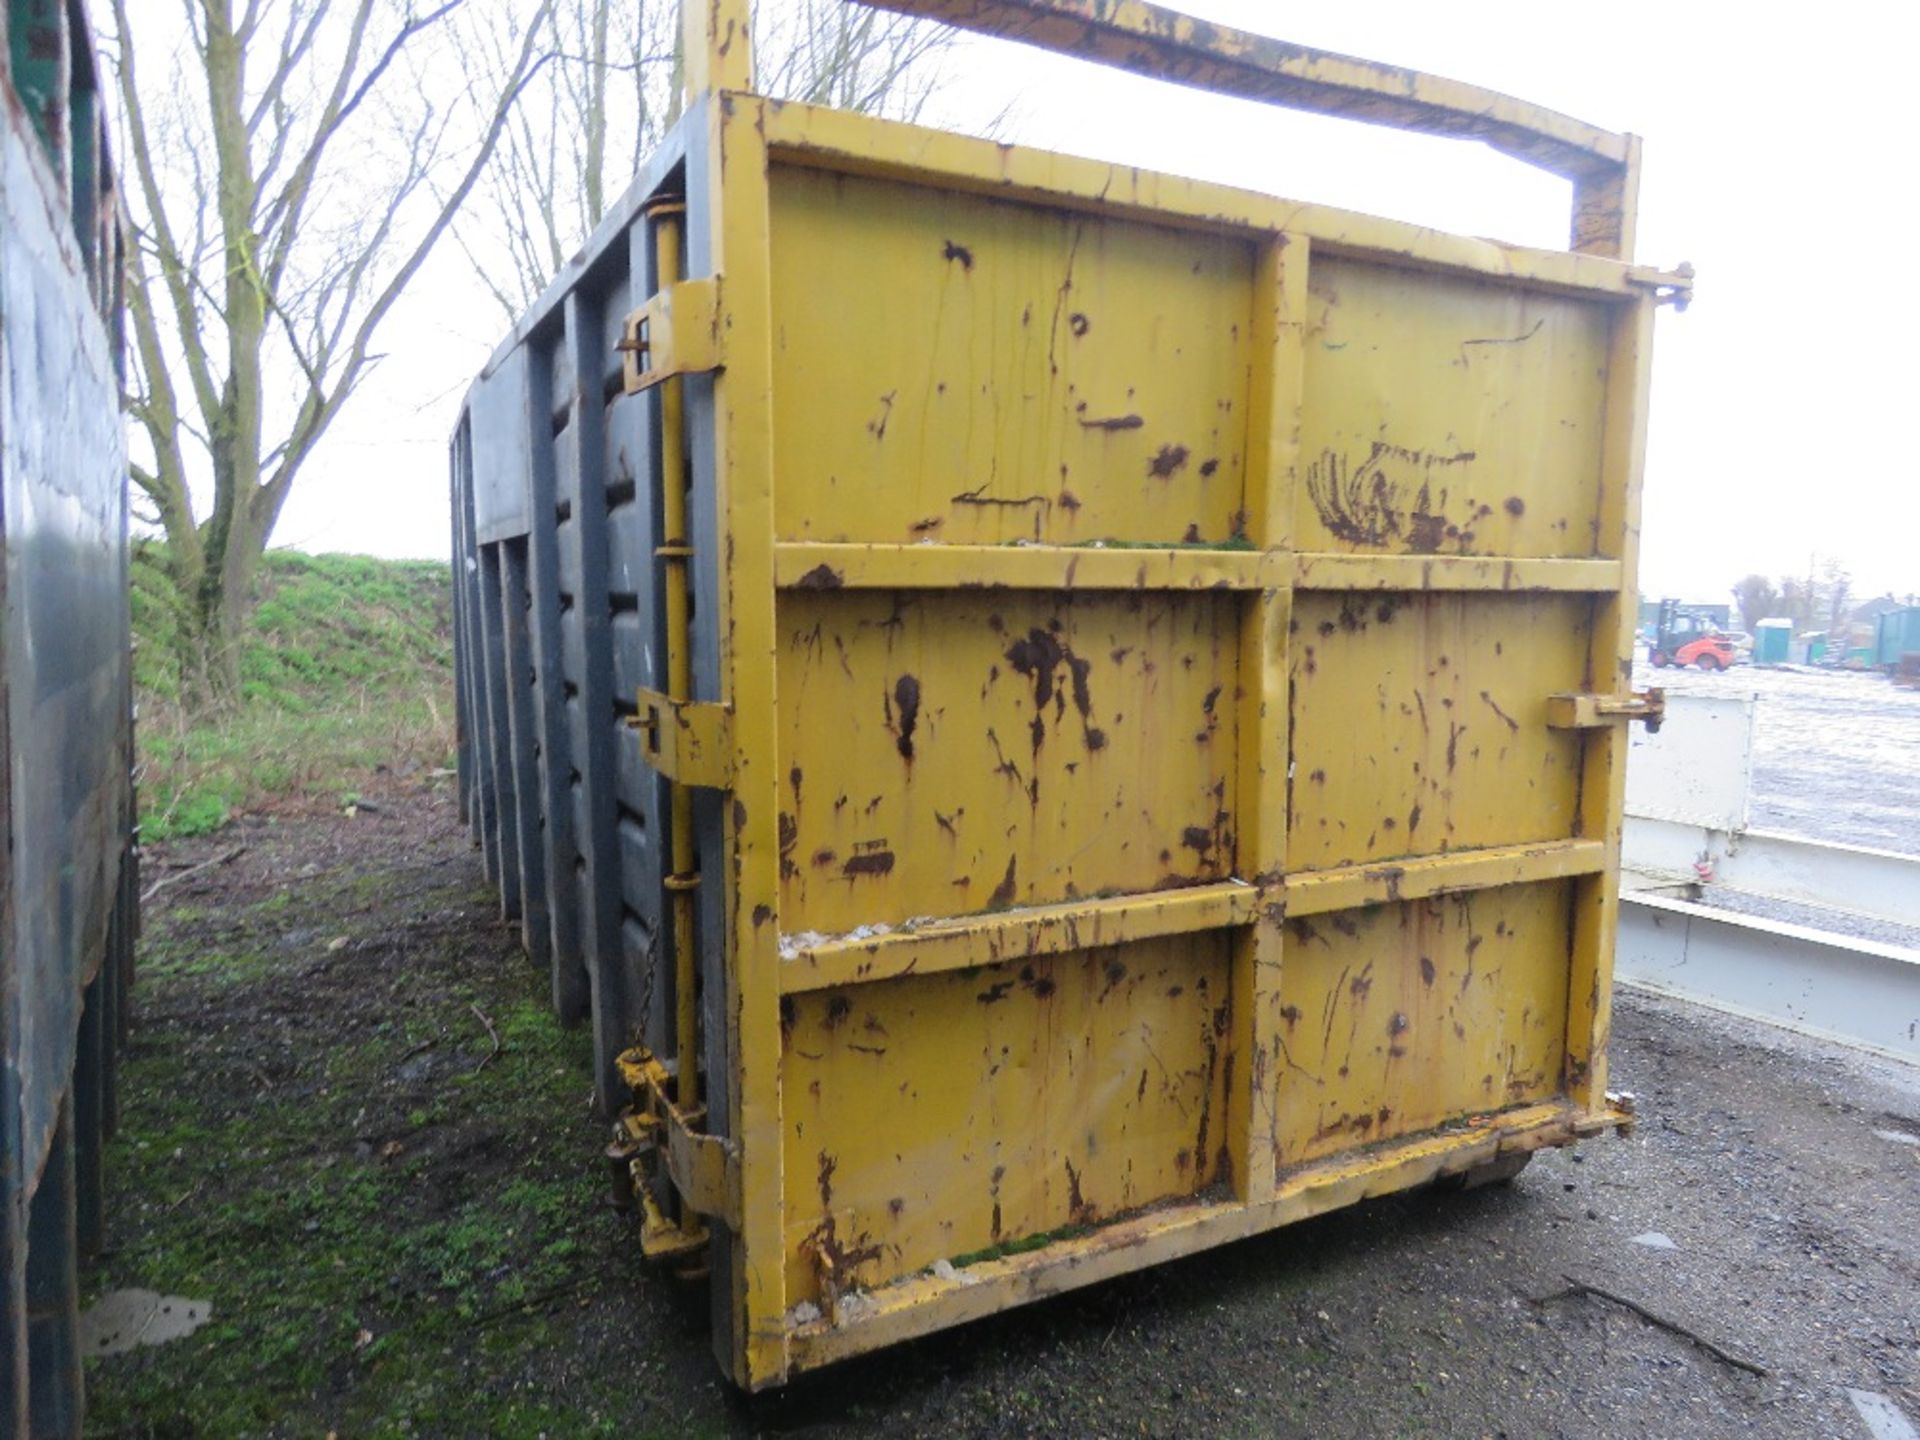 HOOK LOADER BIN, ROLLONOFF TYPE, 40YARD CAPACITY APPROX WITH FULL WIDTH REAR DOOR. DIRECT FROM LOCAL - Image 4 of 7